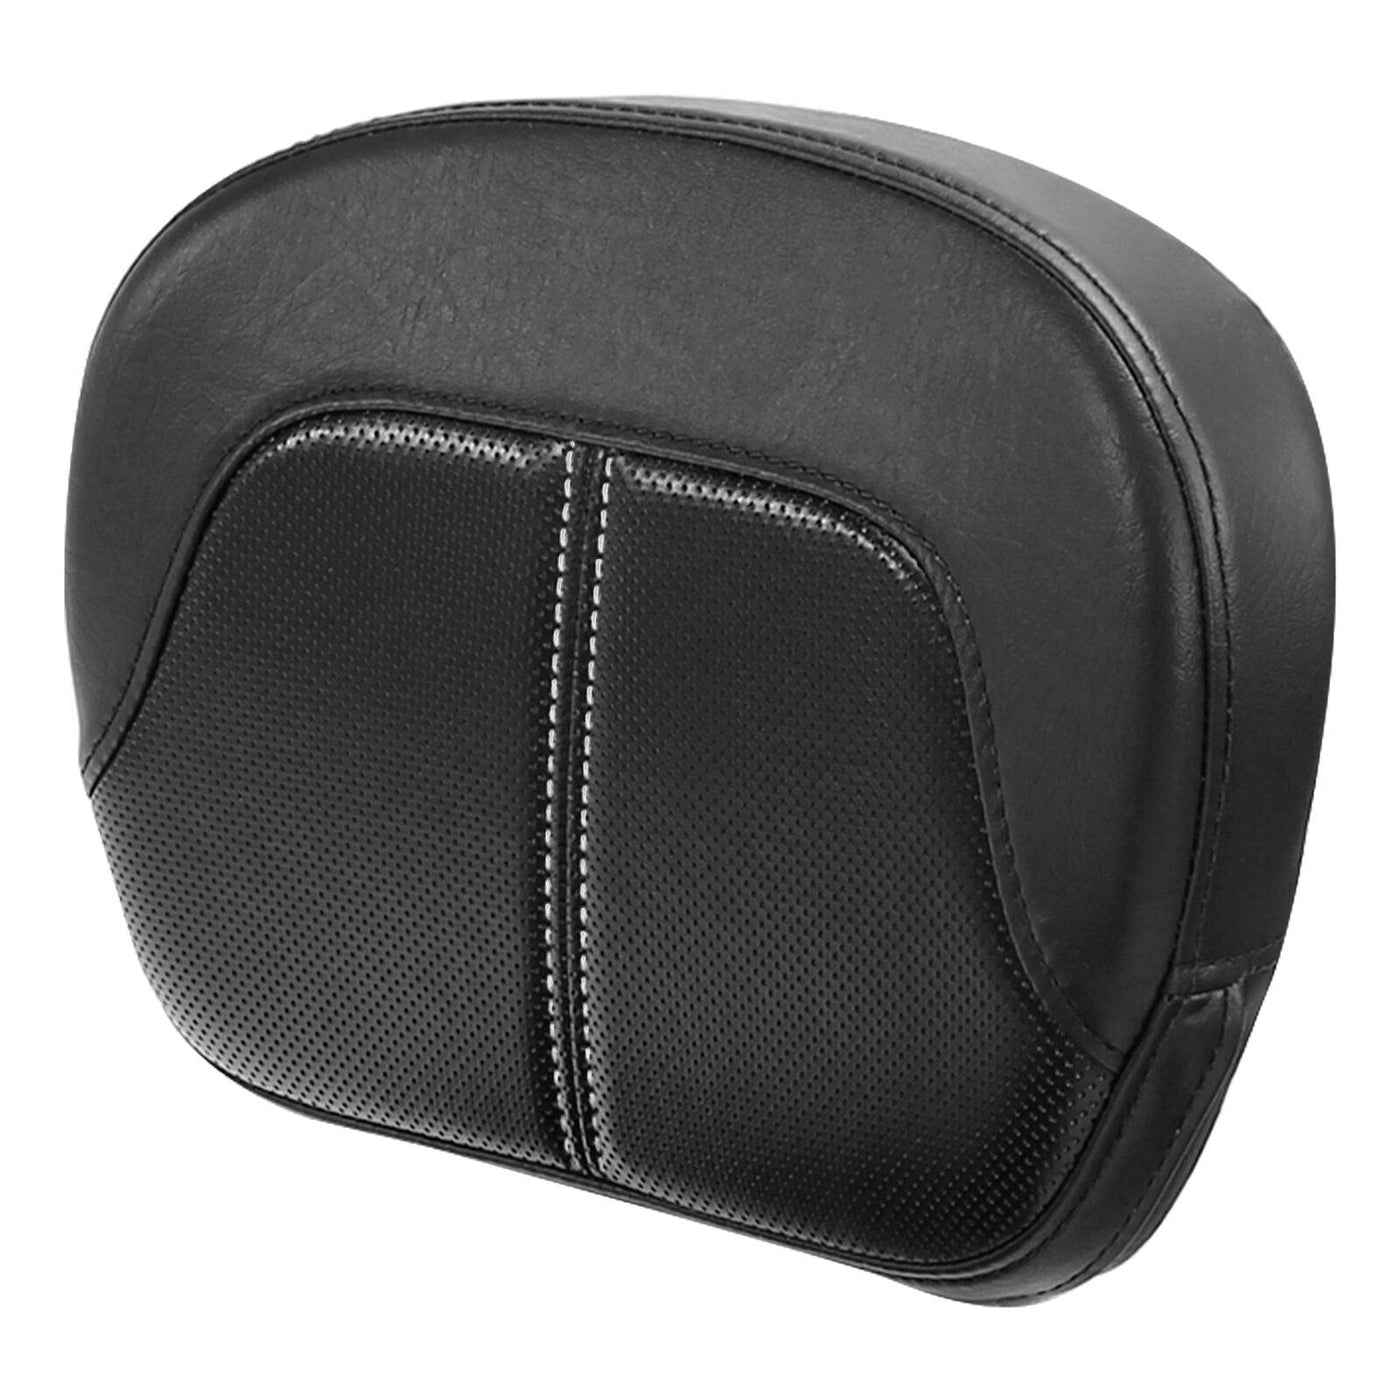 Sissy Bar Passenger Backrest Pad Fit For Harley Touring Street Glide Road King - Moto Life Products